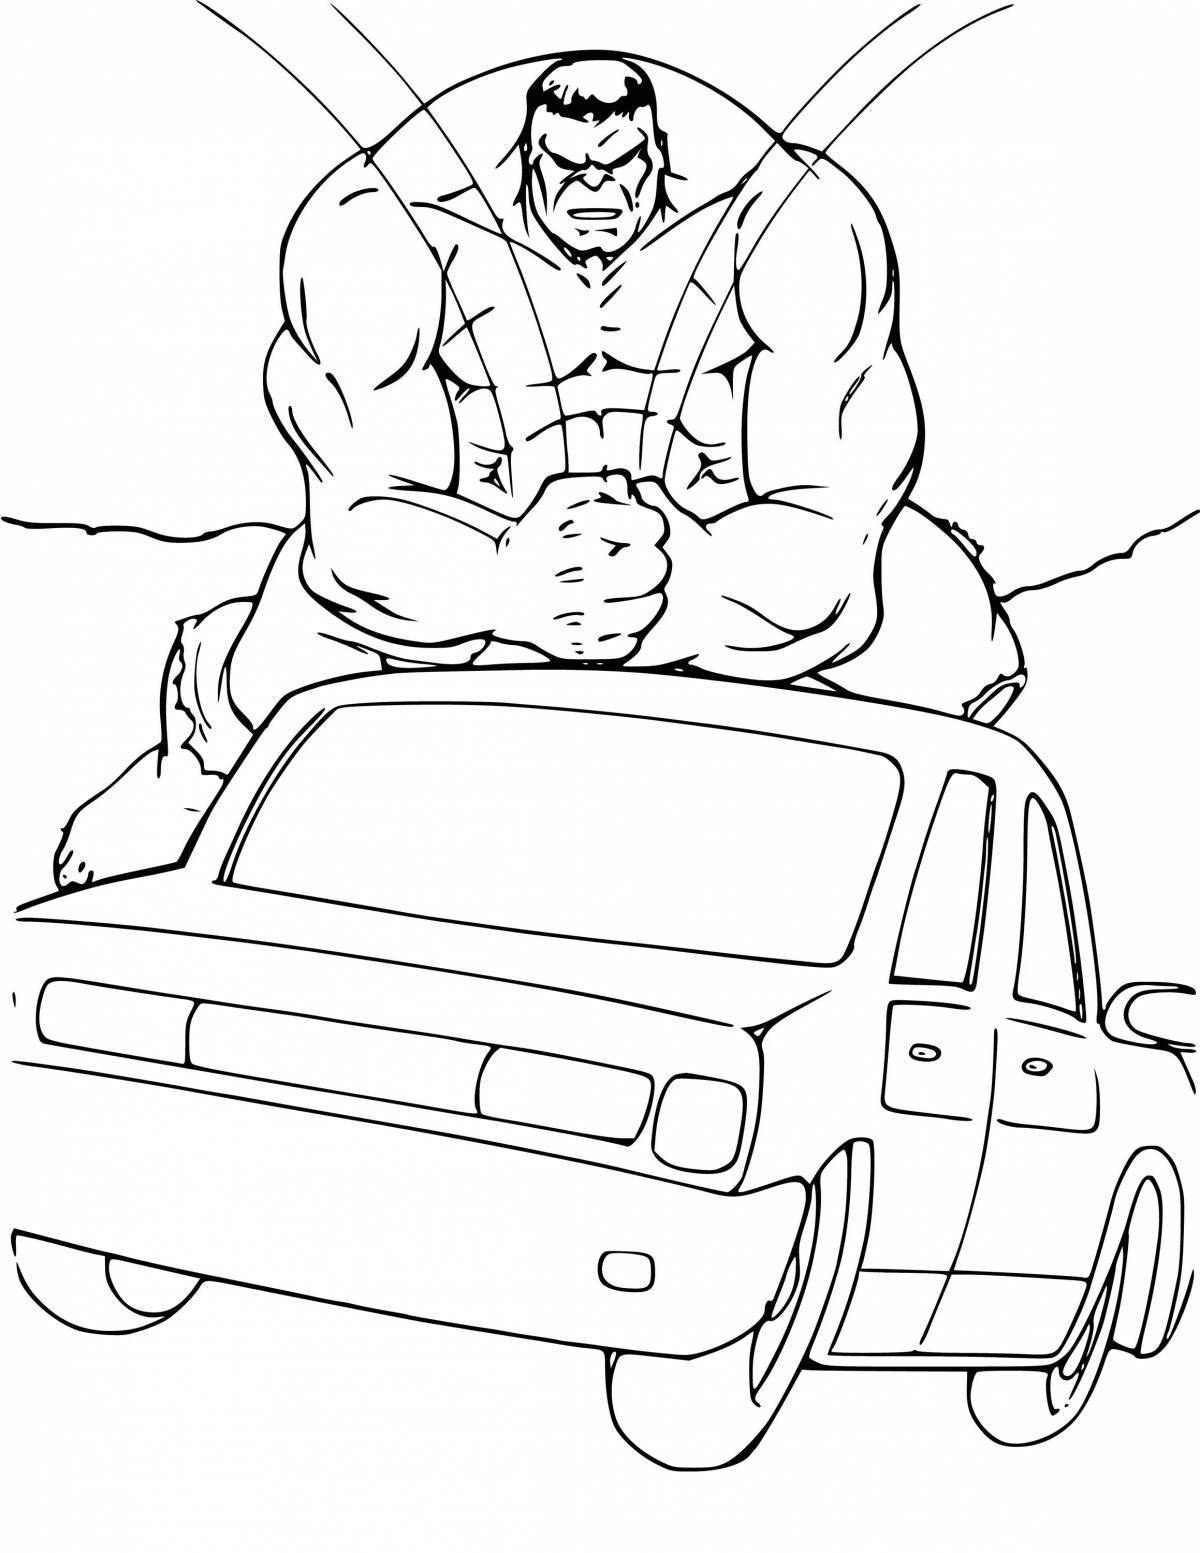 Colorfully illustrated hulk coloring page